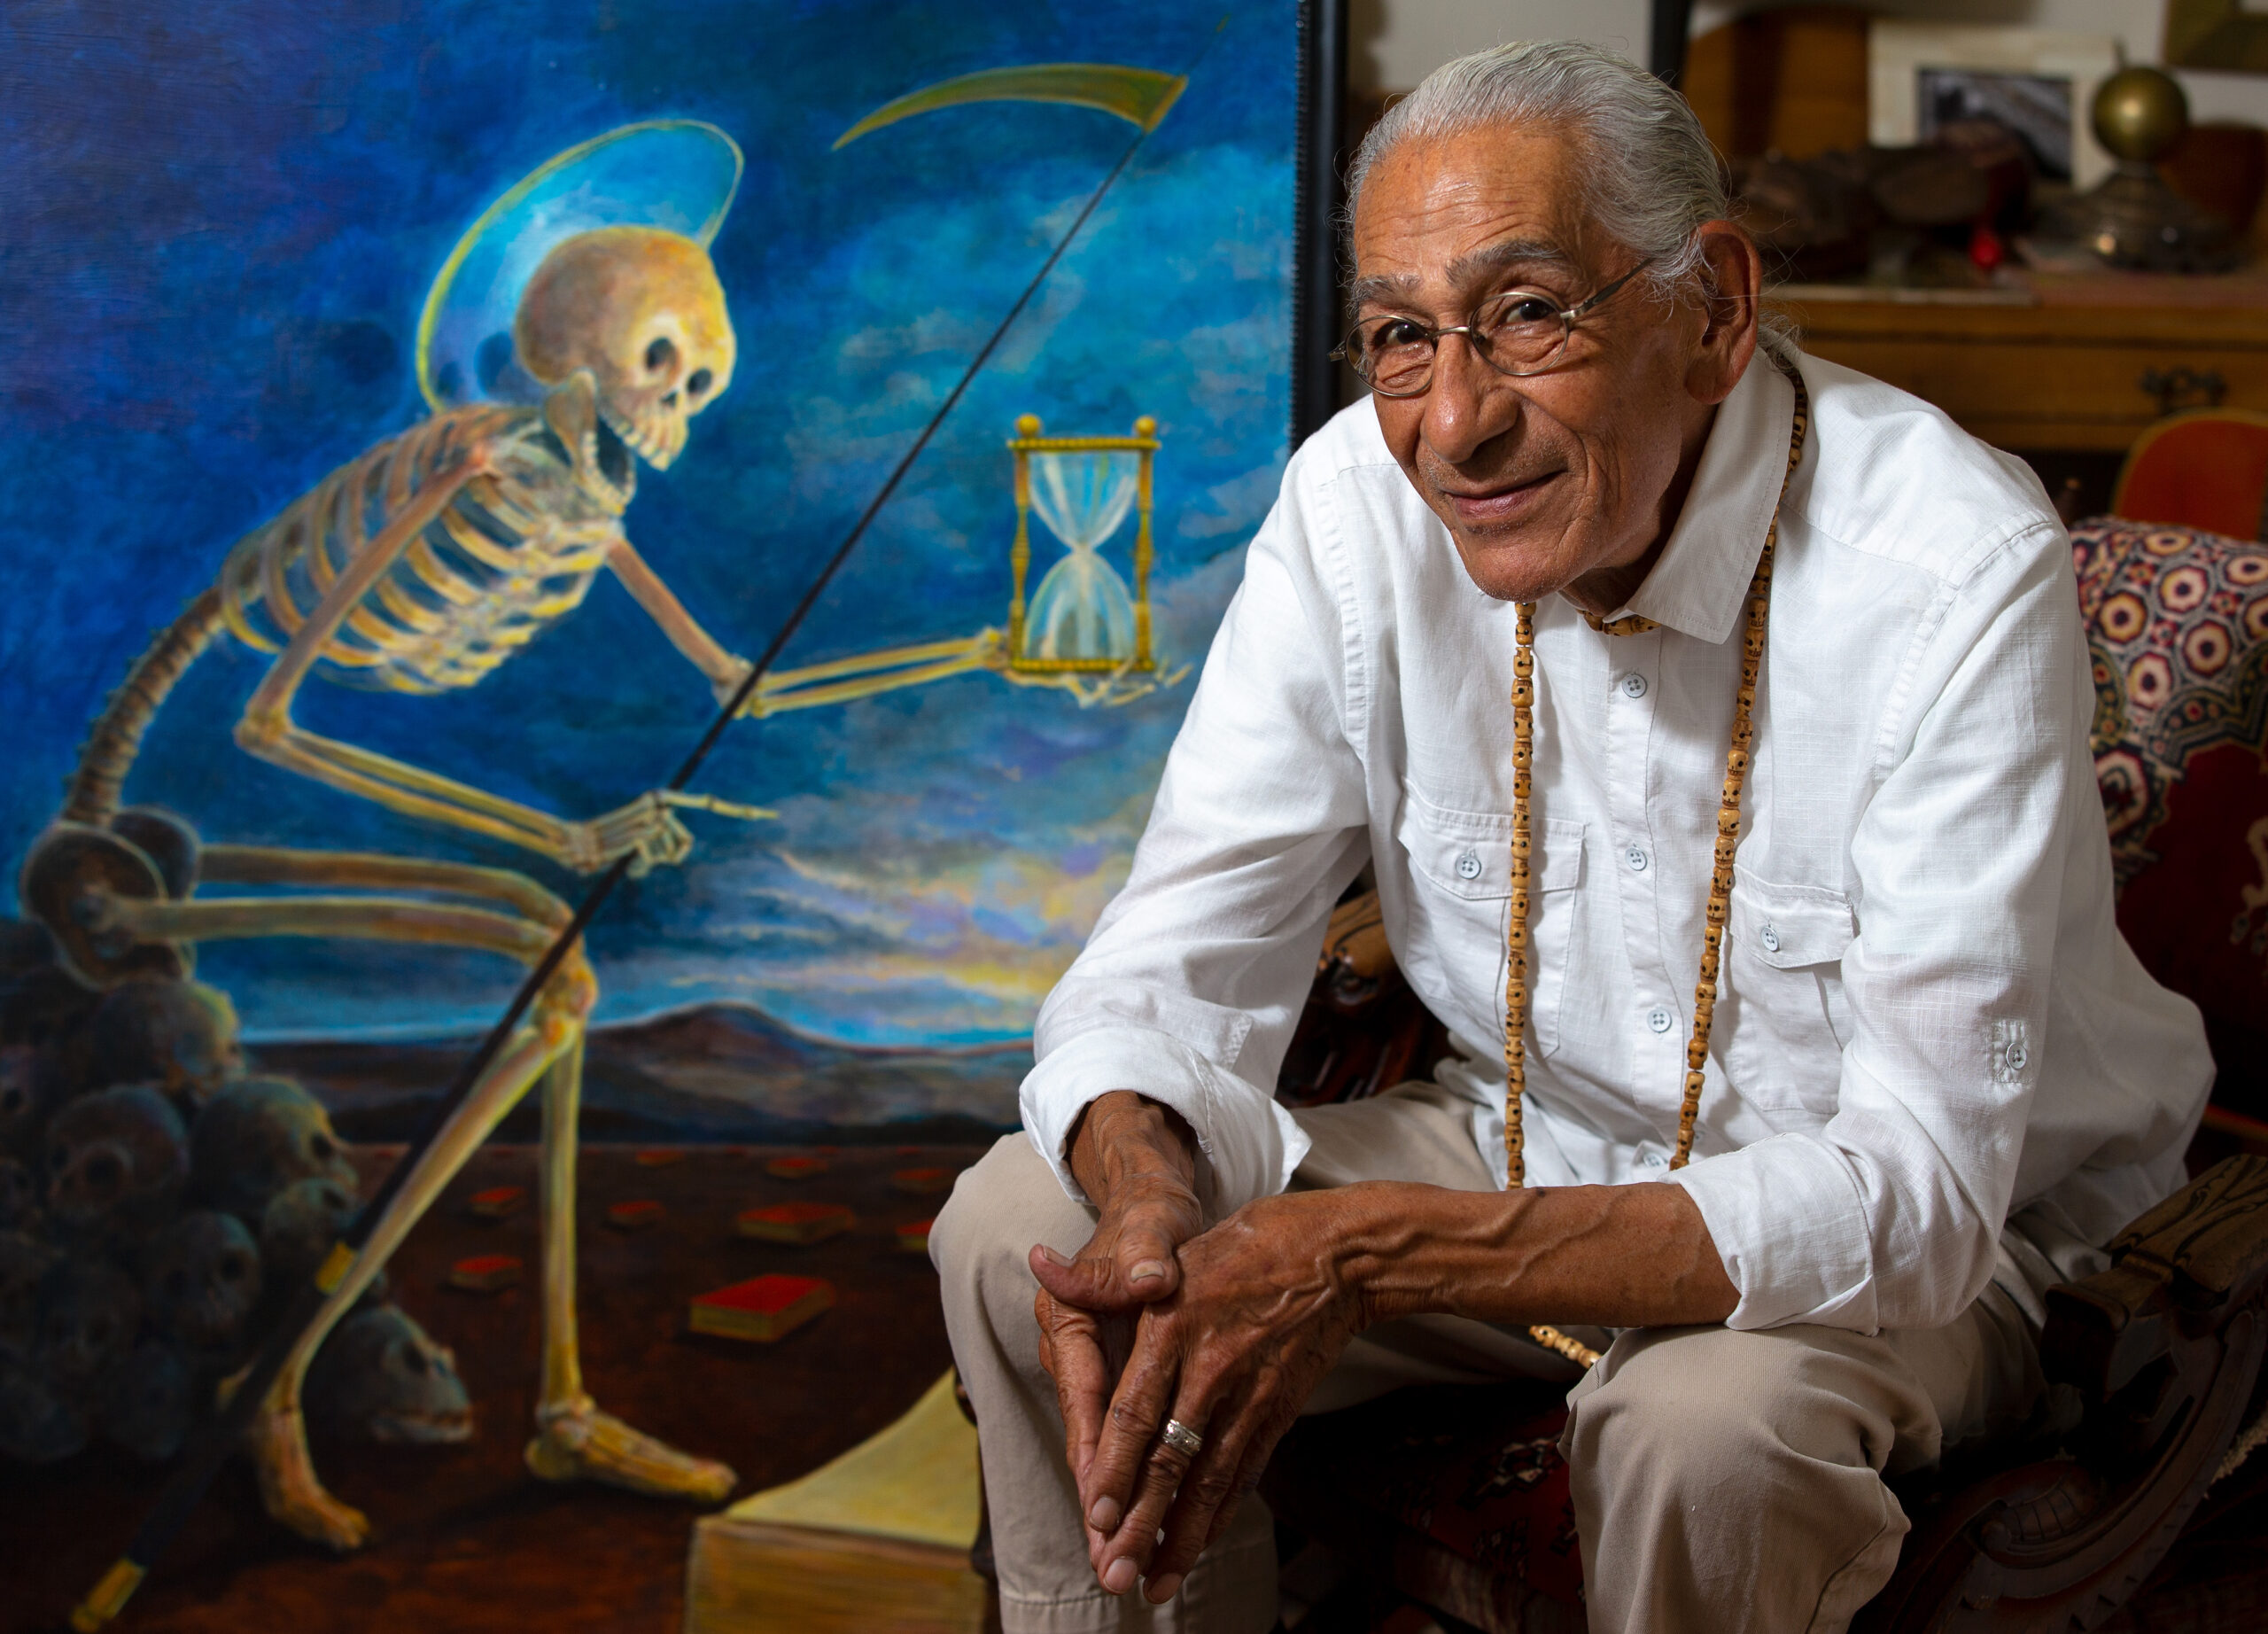 Artist Peter Perez sits beside a painting he created of the Saint of Death, at his home in Santa Rosa, California, on Thursday, October 22, 2020. (Alvin A.H. Jornada / The Press Democrat)